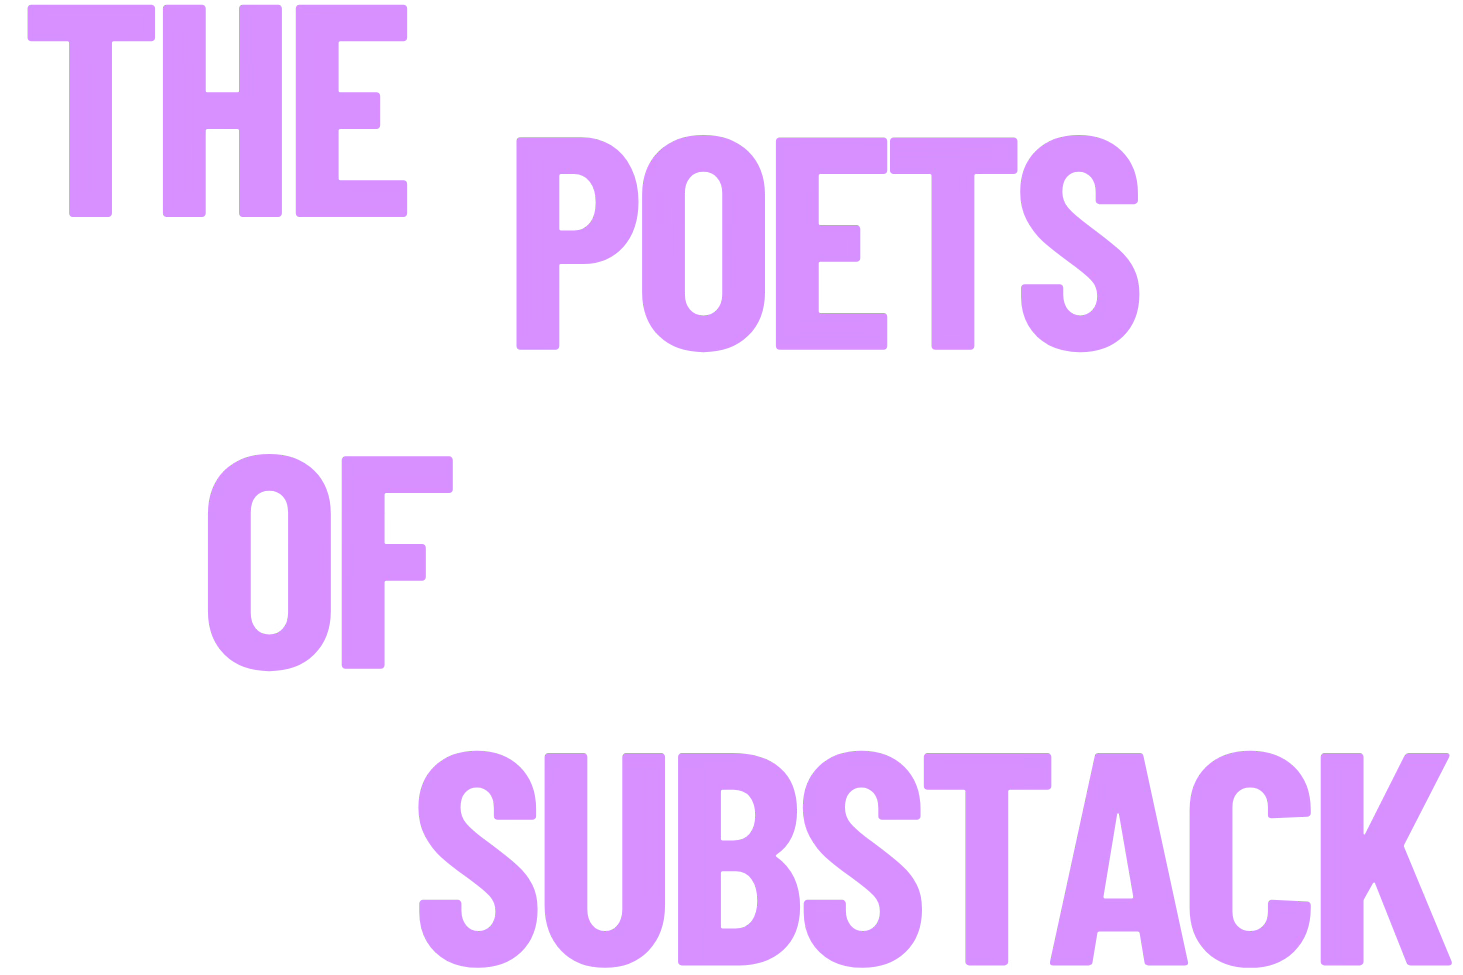 The Poets of Substack